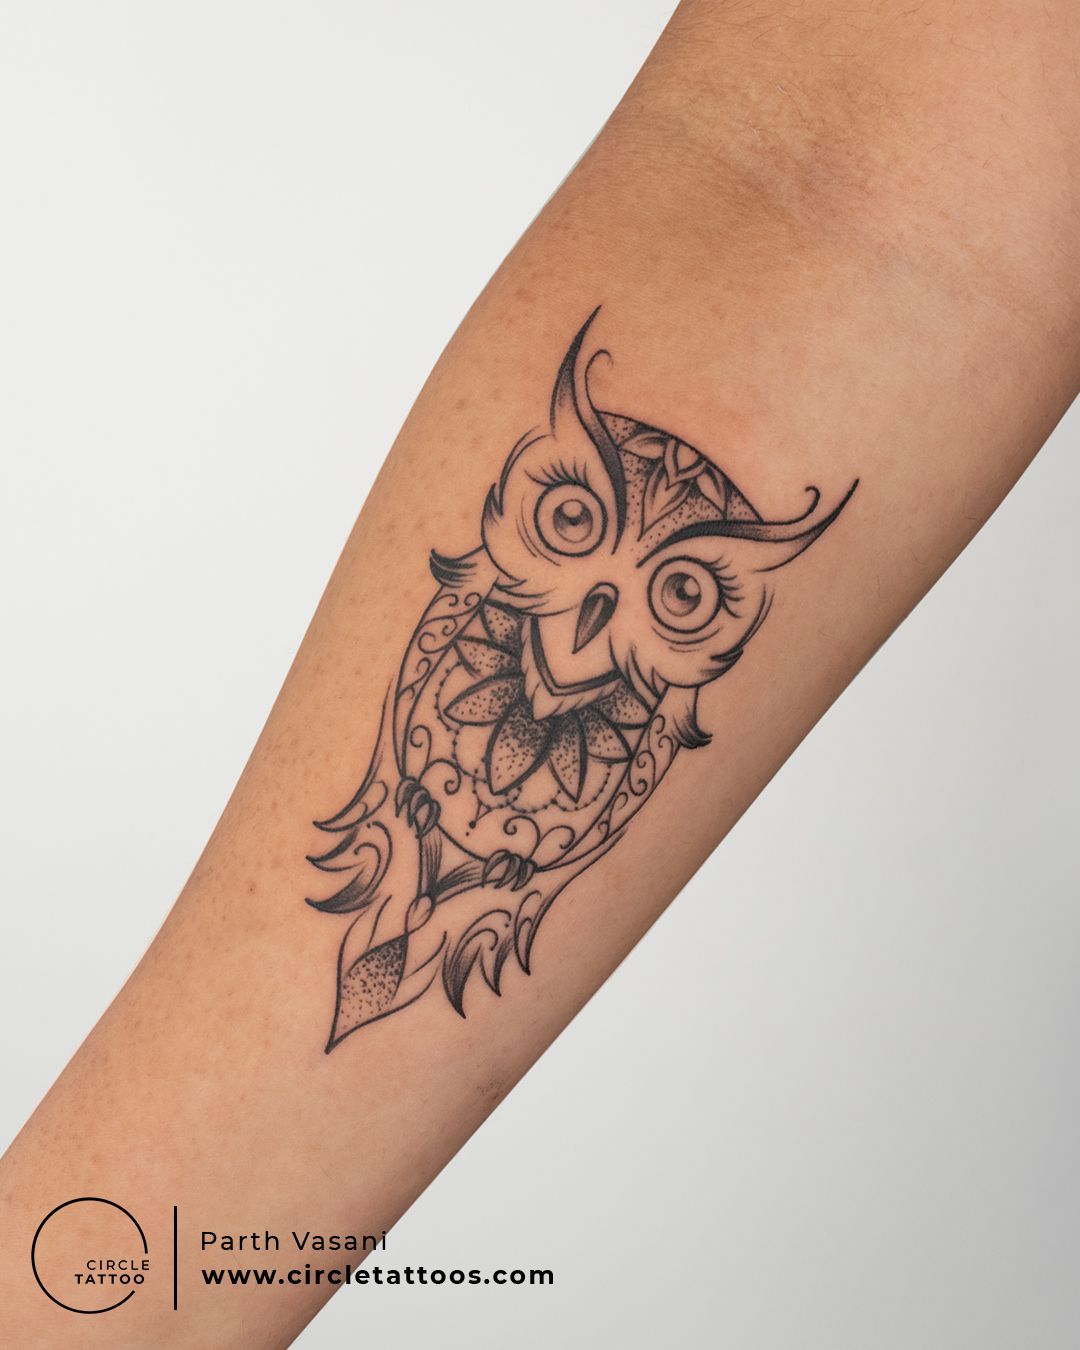 Abusive ink - Owl tattoo 🦉 #neotraditional #tattoo #owltattoo #owl #tattoos  #owltattoos #owltattoodesign #inked #tattooed #ink #oldschooltattoo  #oldschool #eternalink #neotraditionaltattoo #tattooart #tattoo #smalltattoo  #smalltattoos #ink #tattoos ...